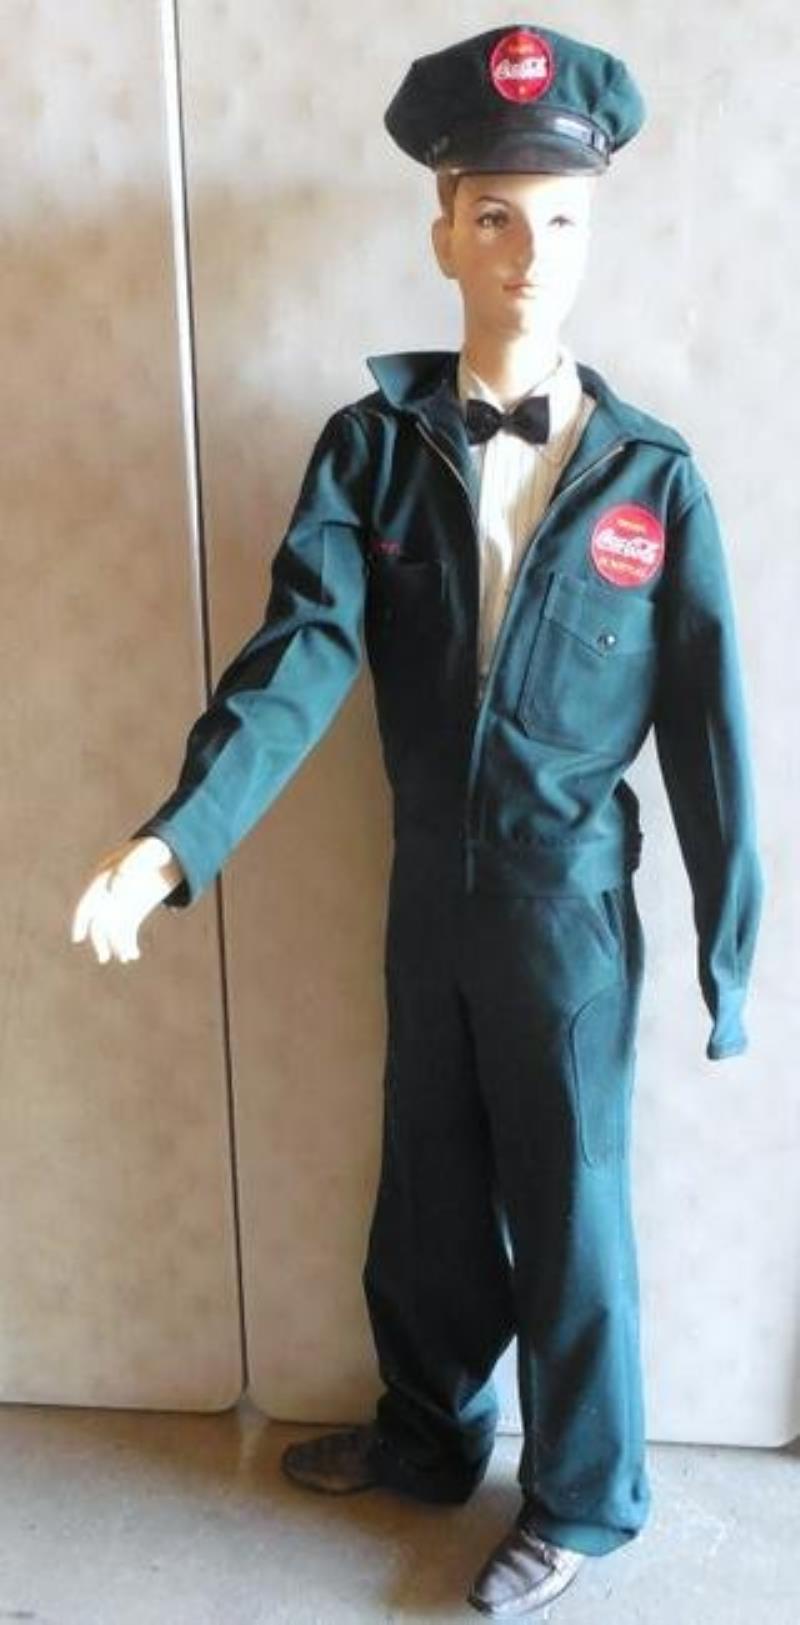 Coca-Cola Mannequin in Delivery Uniform missing a hand